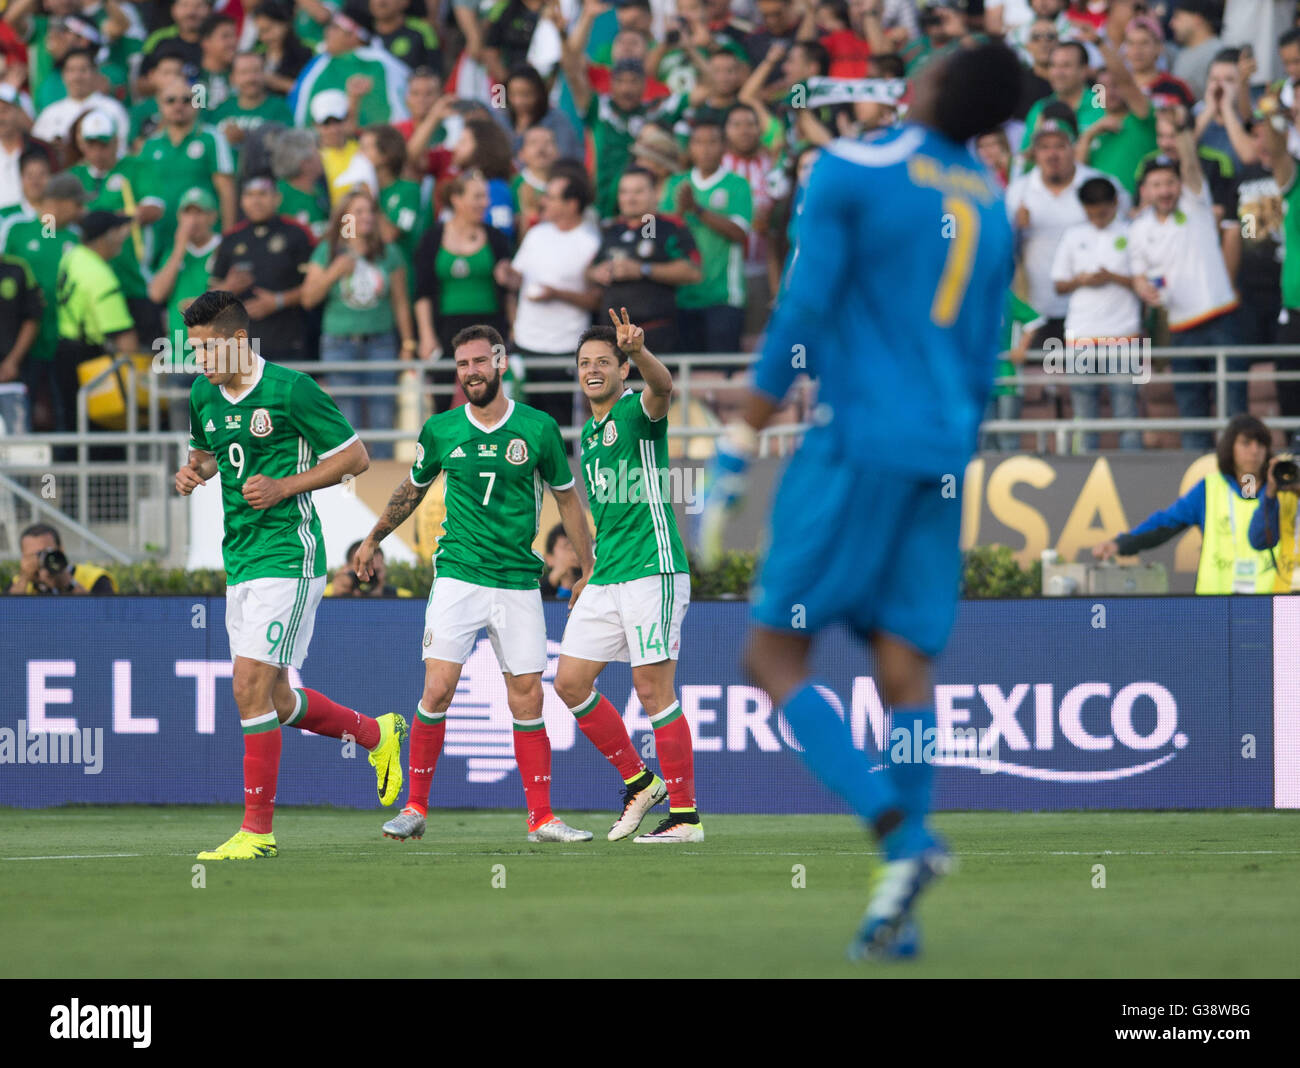 Pasadena, USA. 9th June, 2016. Mexico's Javier 'Chicharito' Hernandez (3rd L) celebrates after scoring during the Copa America Centenario tournament Group C football match between Mexico and Jamaica in Pasadena, California, the United States, on June 9, 2016. Credit:  Yang Lei/Xinhua/Alamy Live News Stock Photo